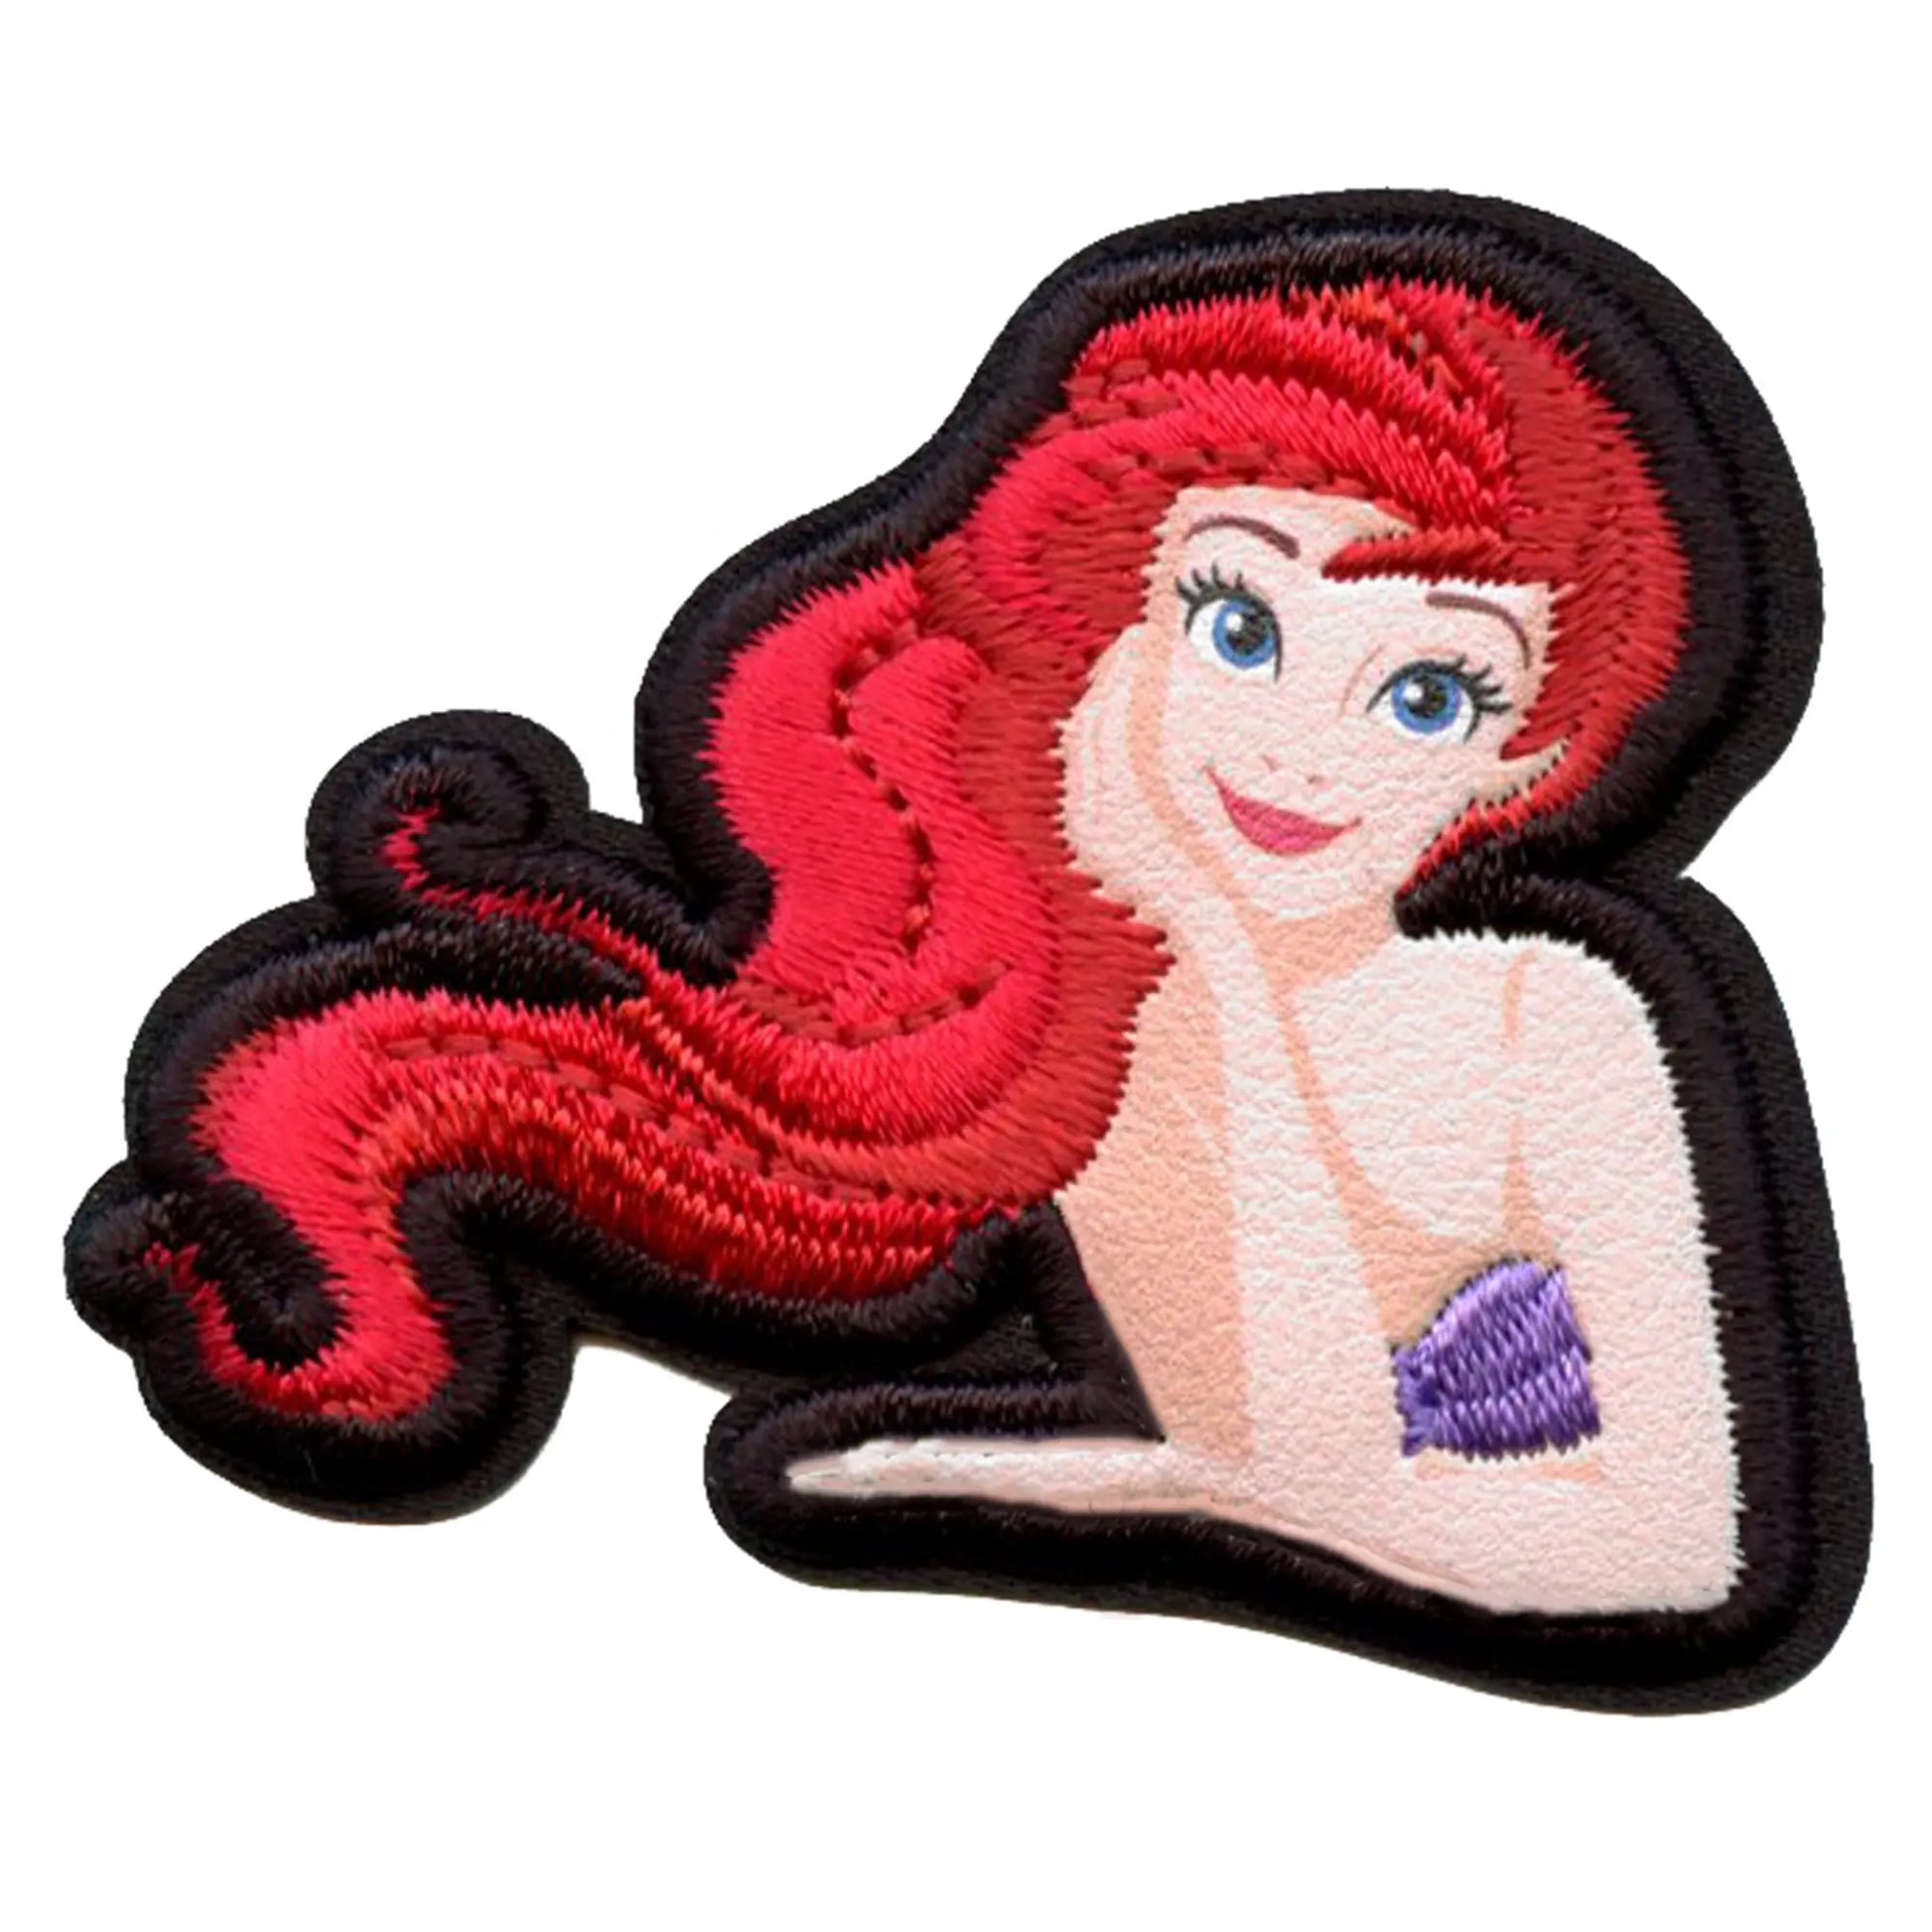 The Little Mermaid Ariel Patch Disney Princess Portrait Embroidered Iron On